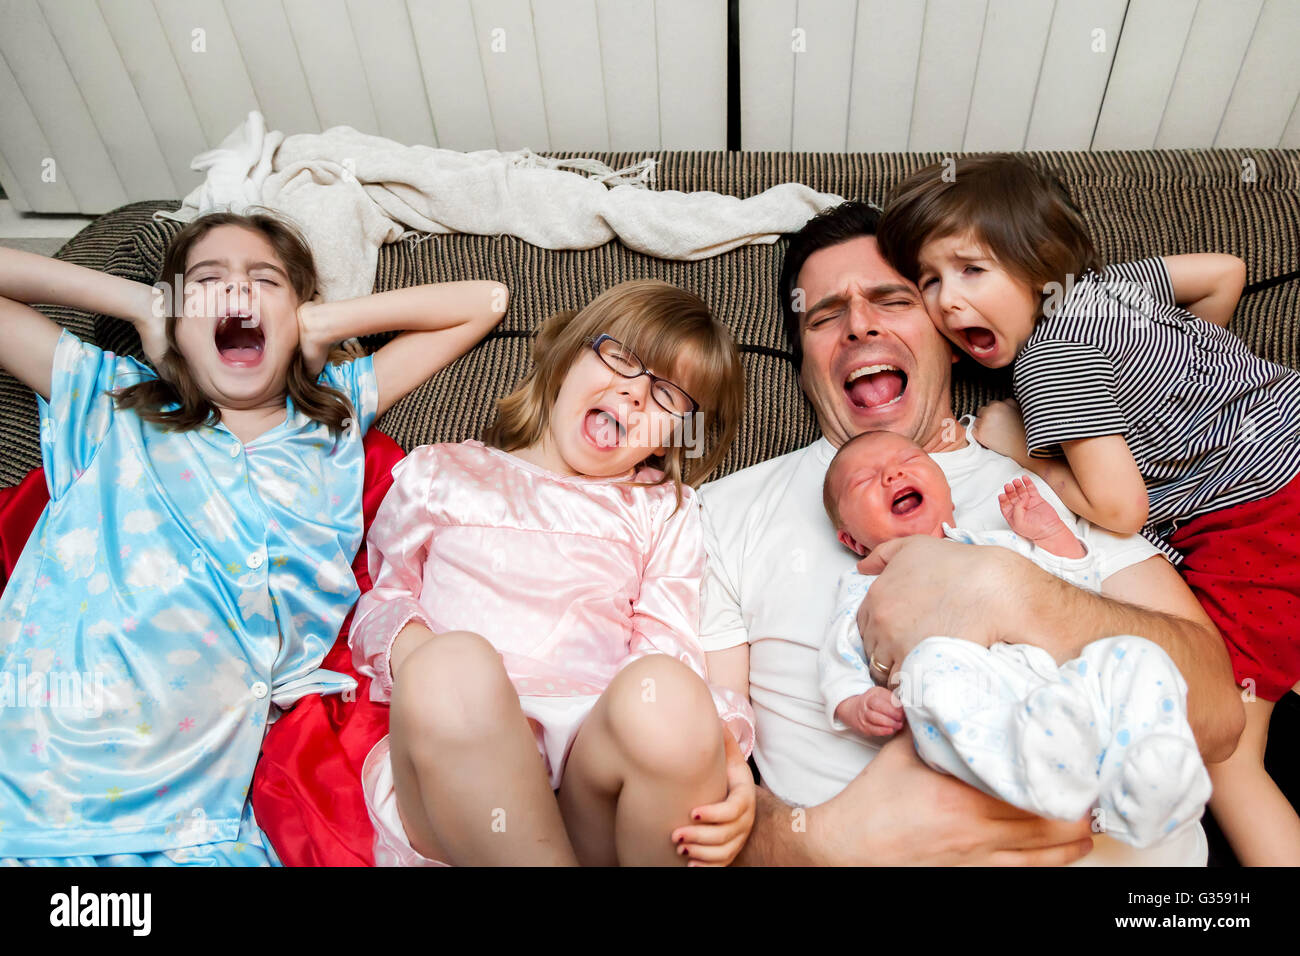 A father, his three daughters, and baby boy lean back on the couch with open mouth screams.  If you can’t beat them, join them. Stock Photo